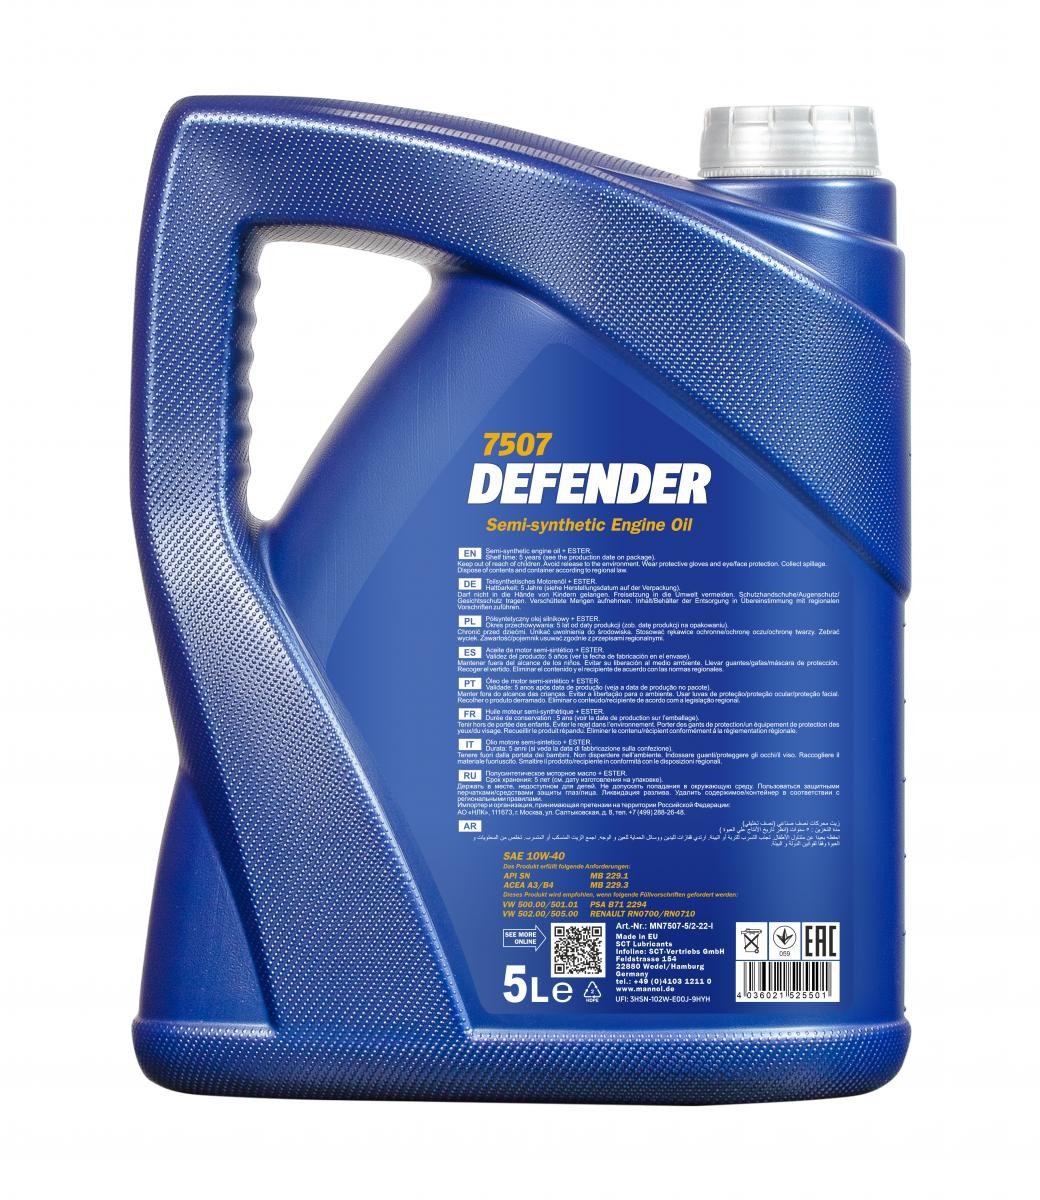 Mannol Defender 10w40 A3/B3 Semi Synthetic Engine Oil, 5 Litres